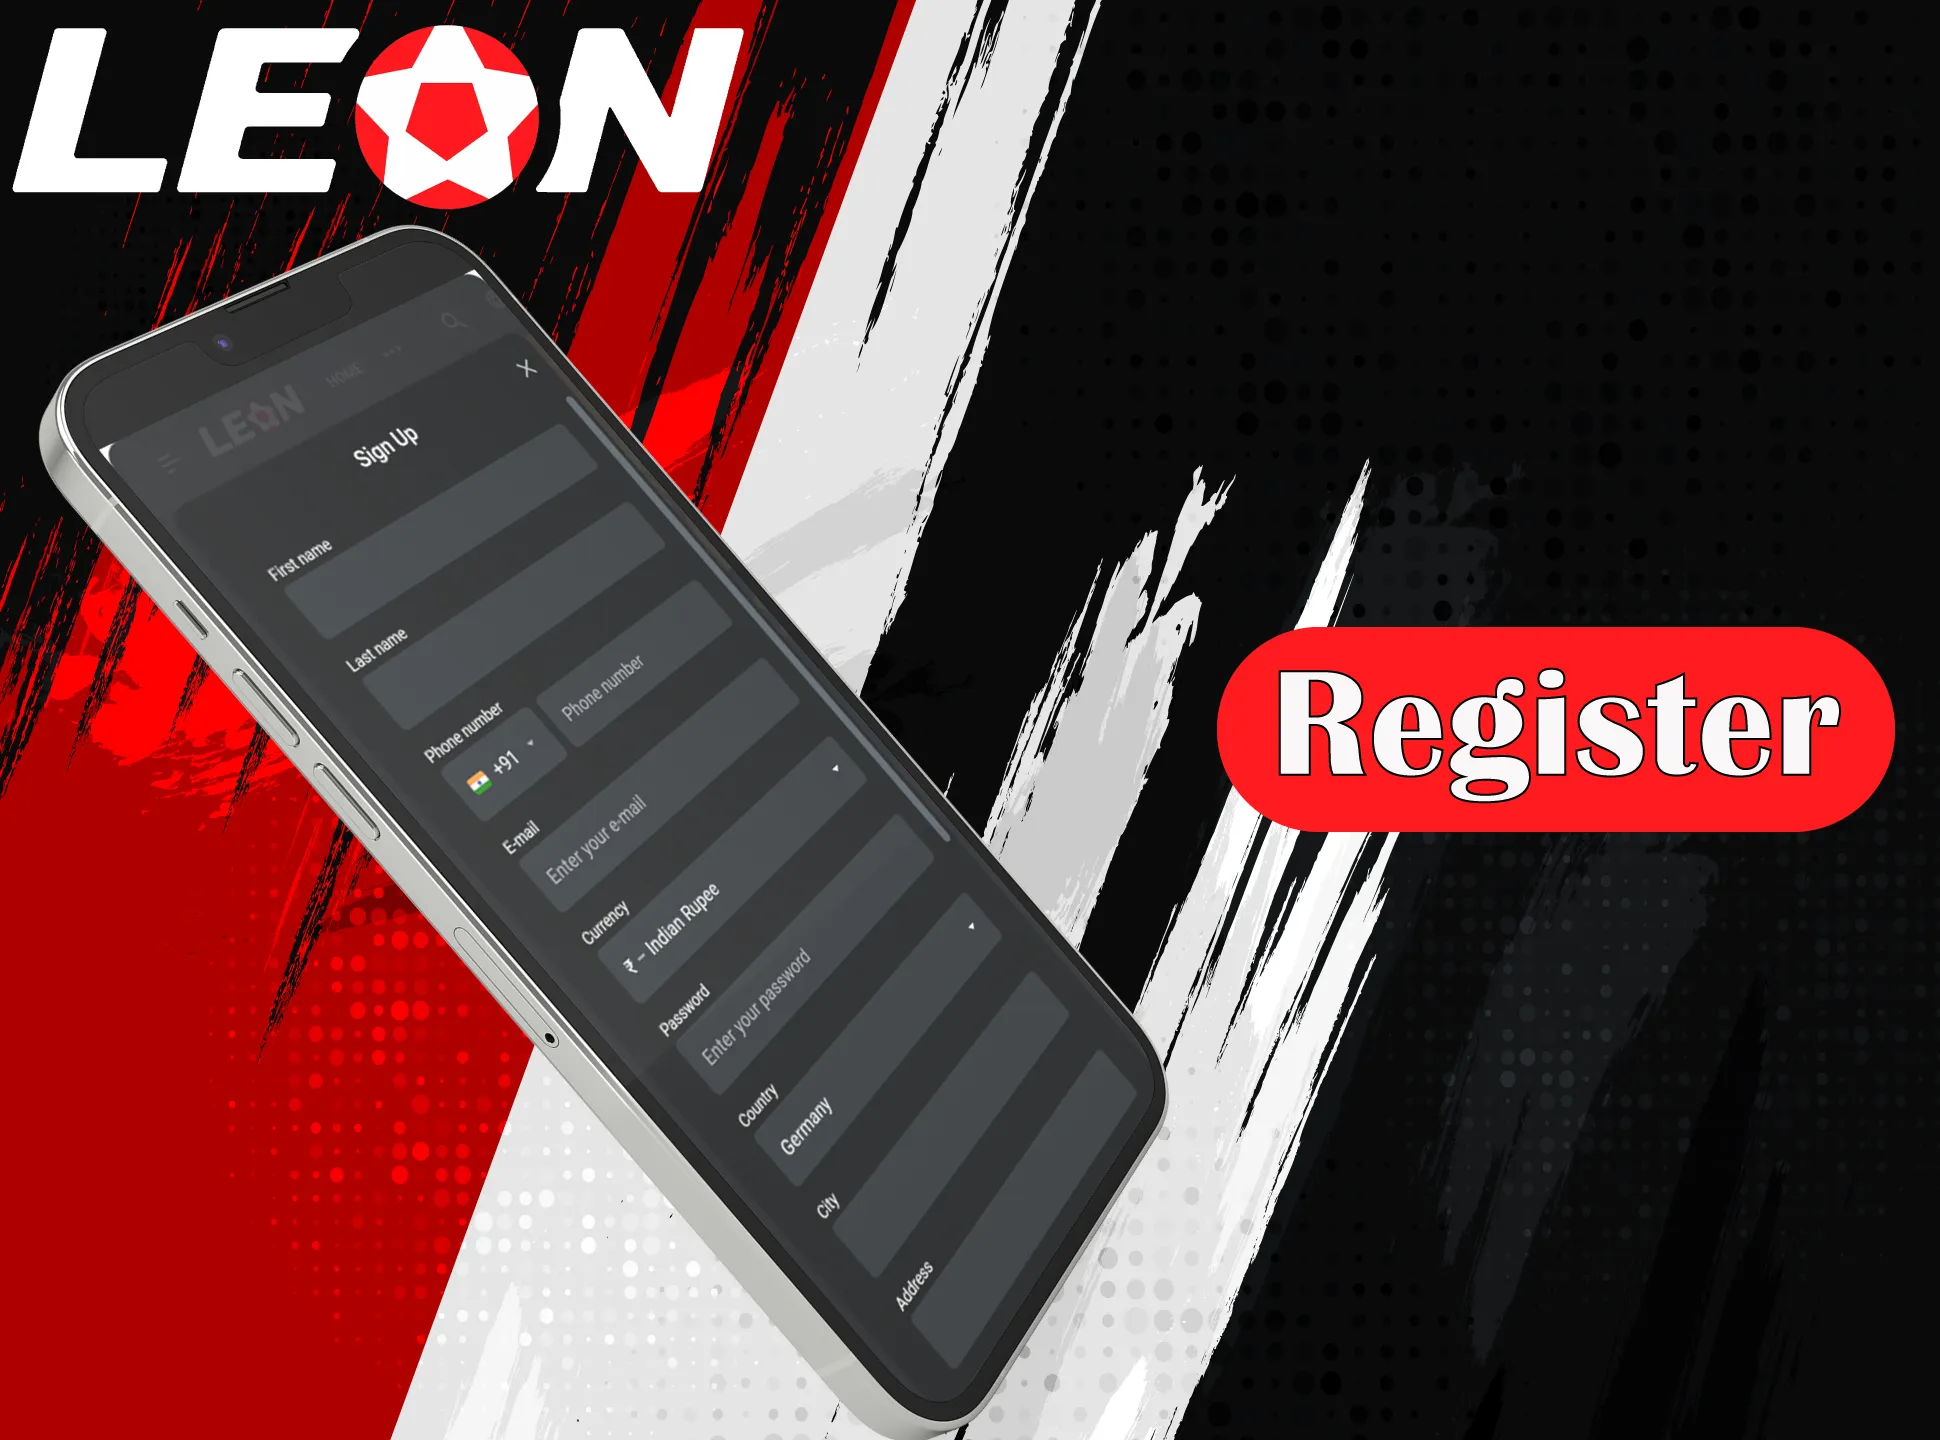 You can download the Leonbet app and register in there.